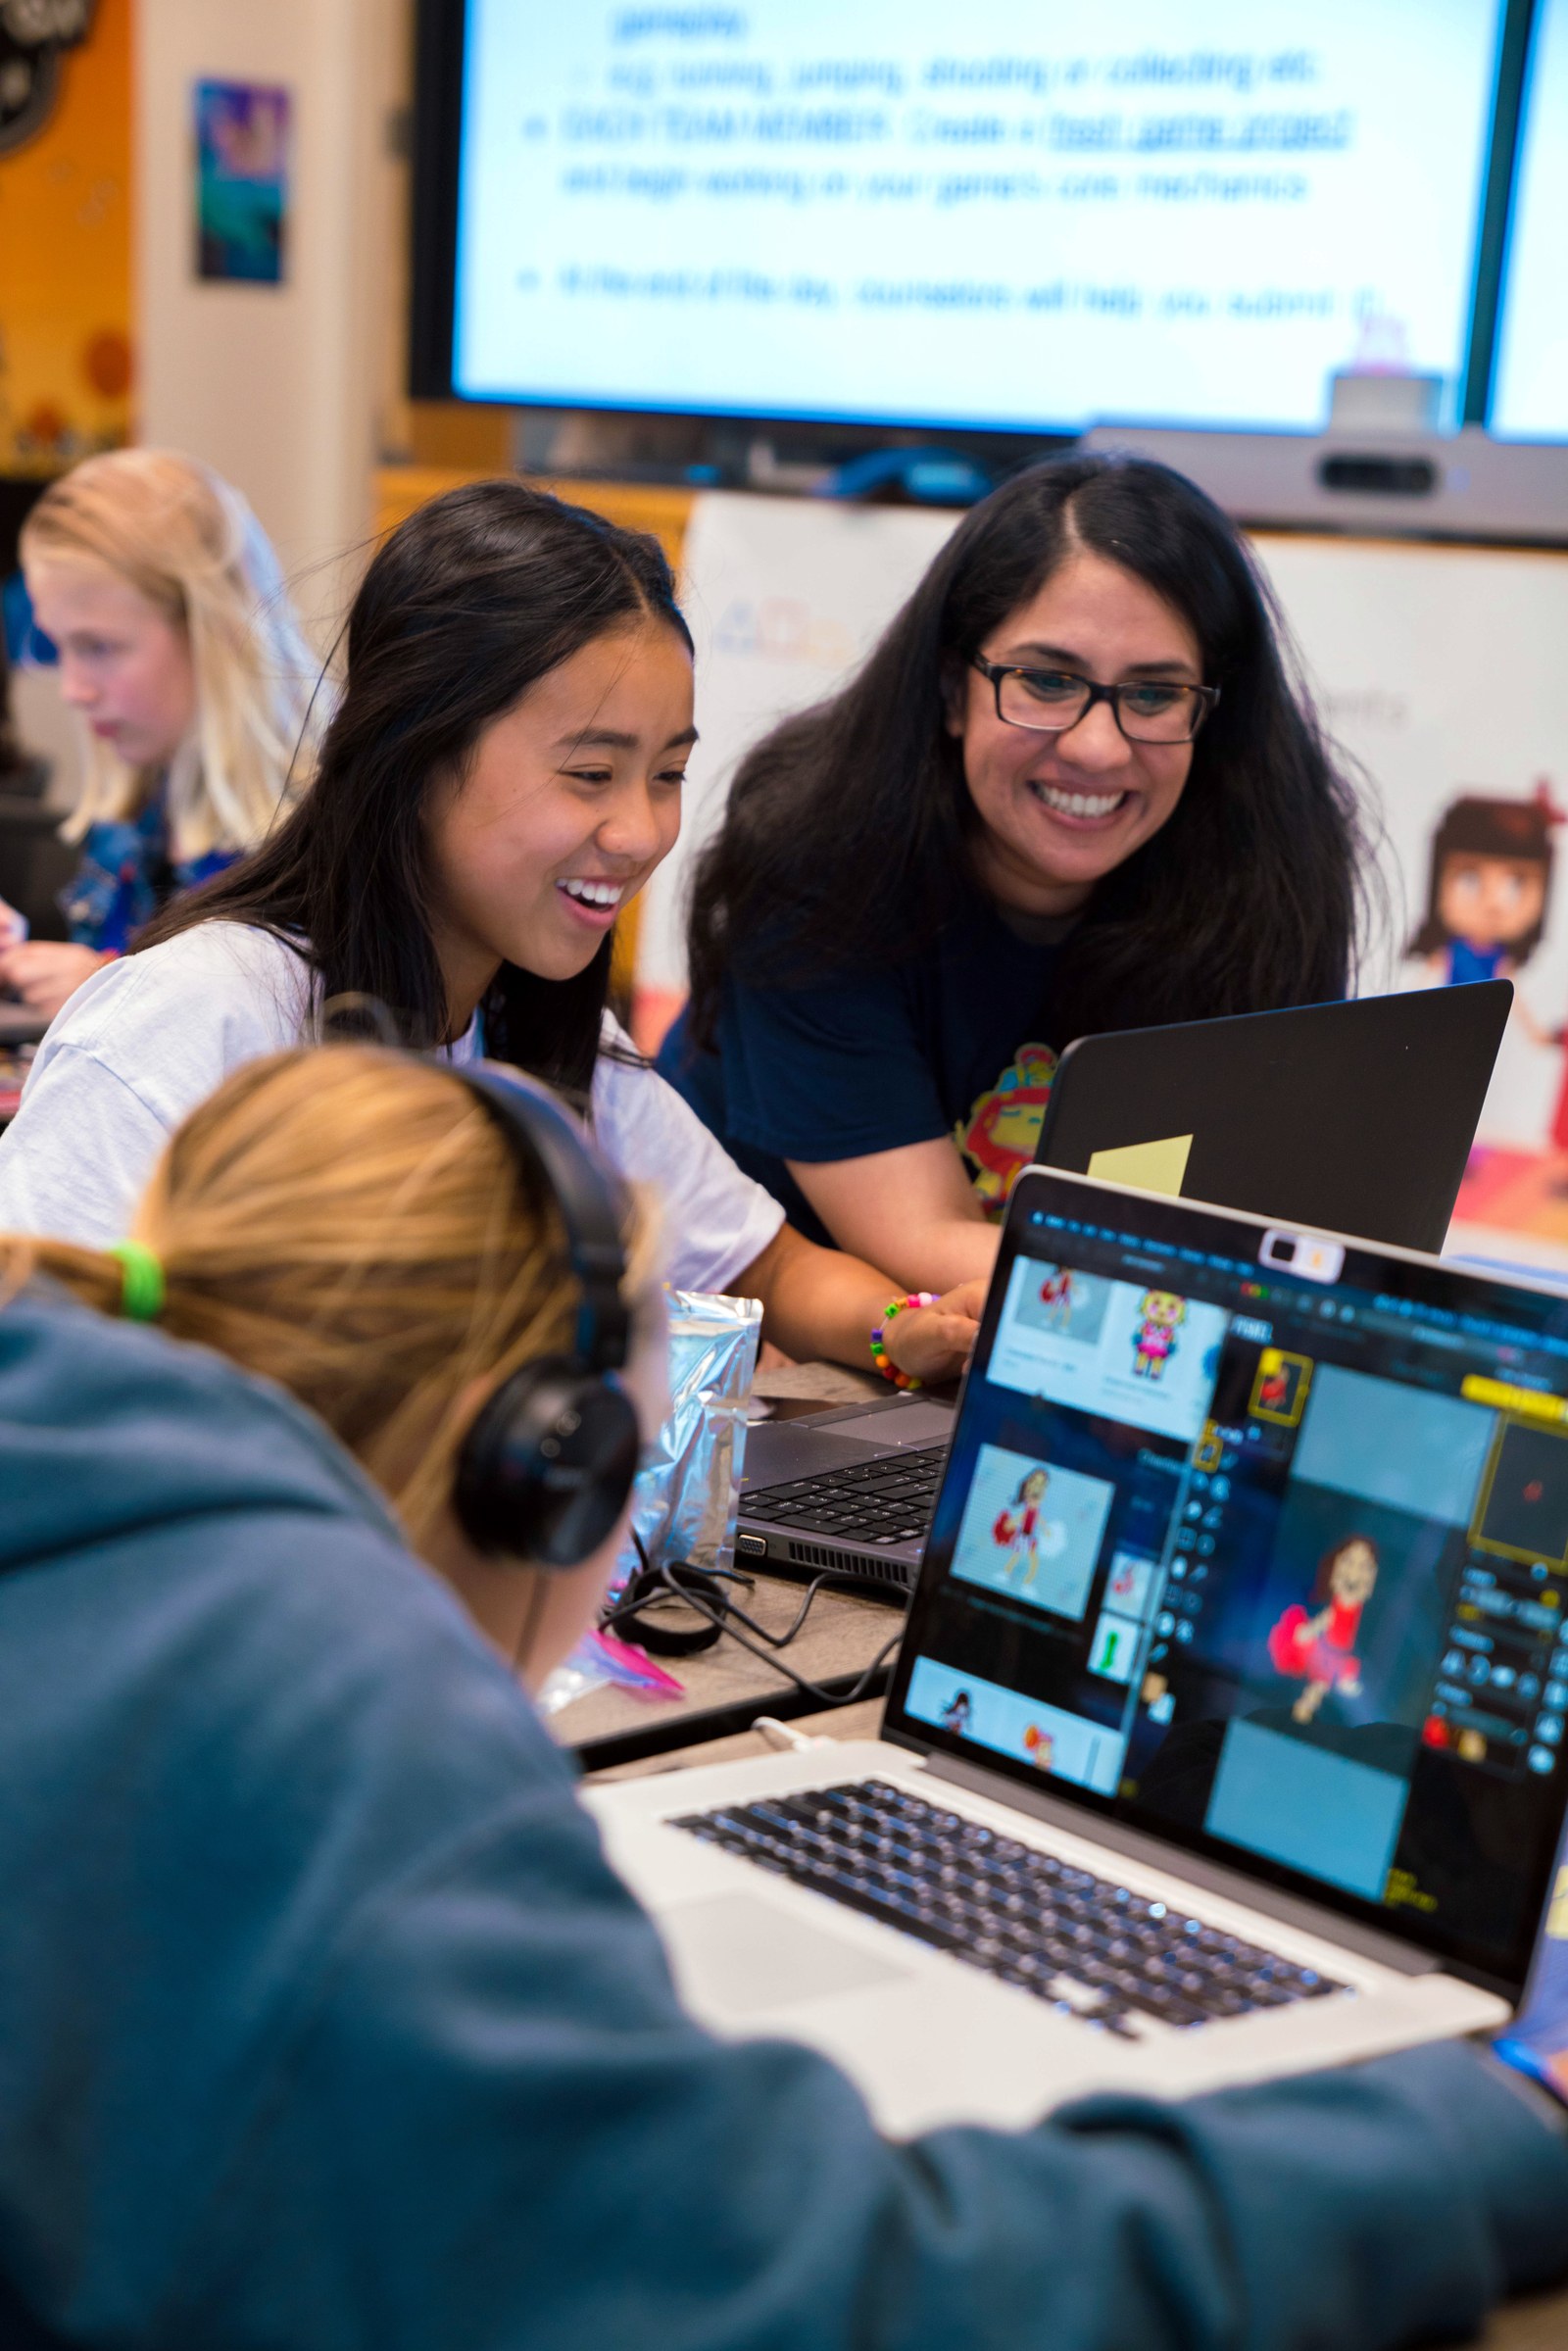 image shows a young woman smiling while the founder of Girls Make Games looks on over her left shoulder. Other girls are visible in the background and in the extreme foreground. They are working intently at laptops.